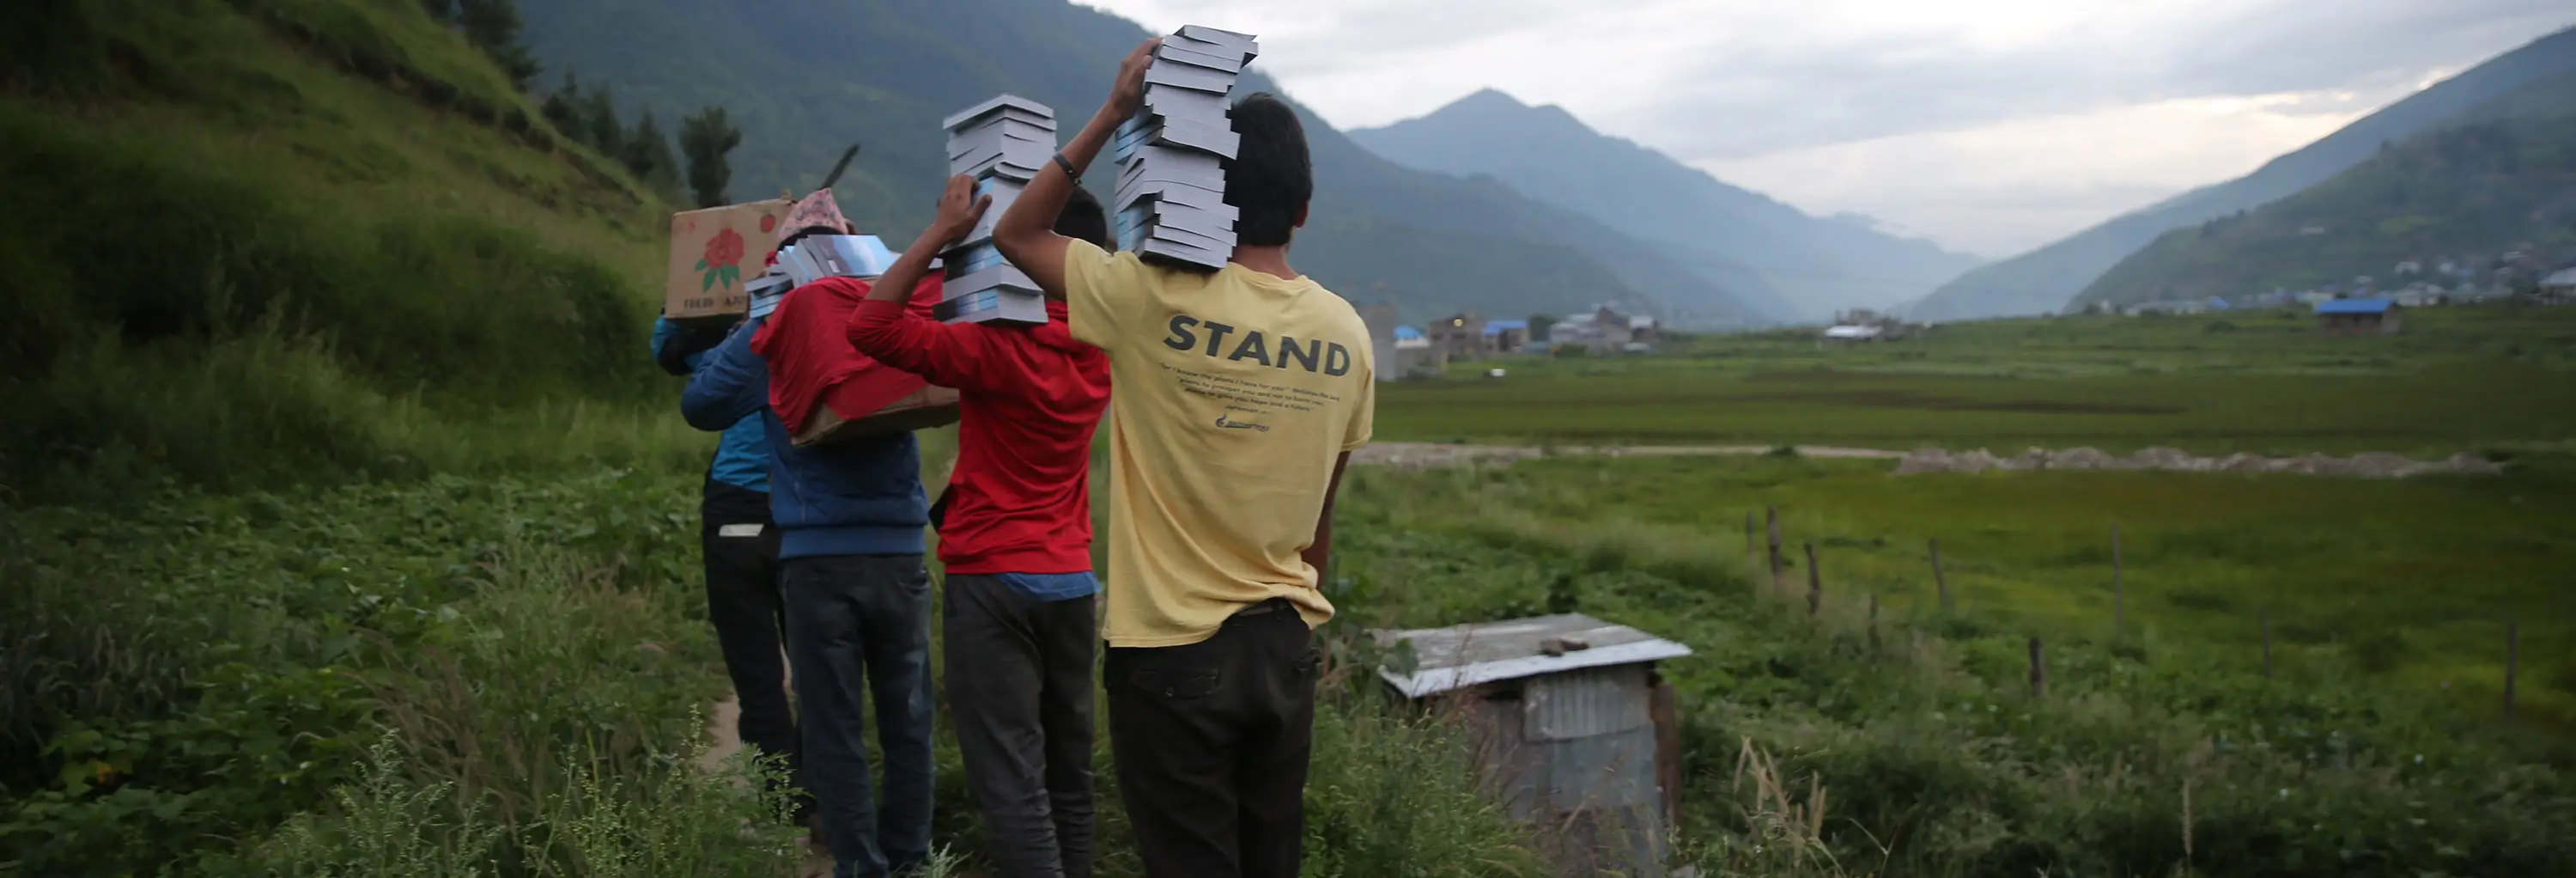 Group of people carrying stacks of Bibles through valley